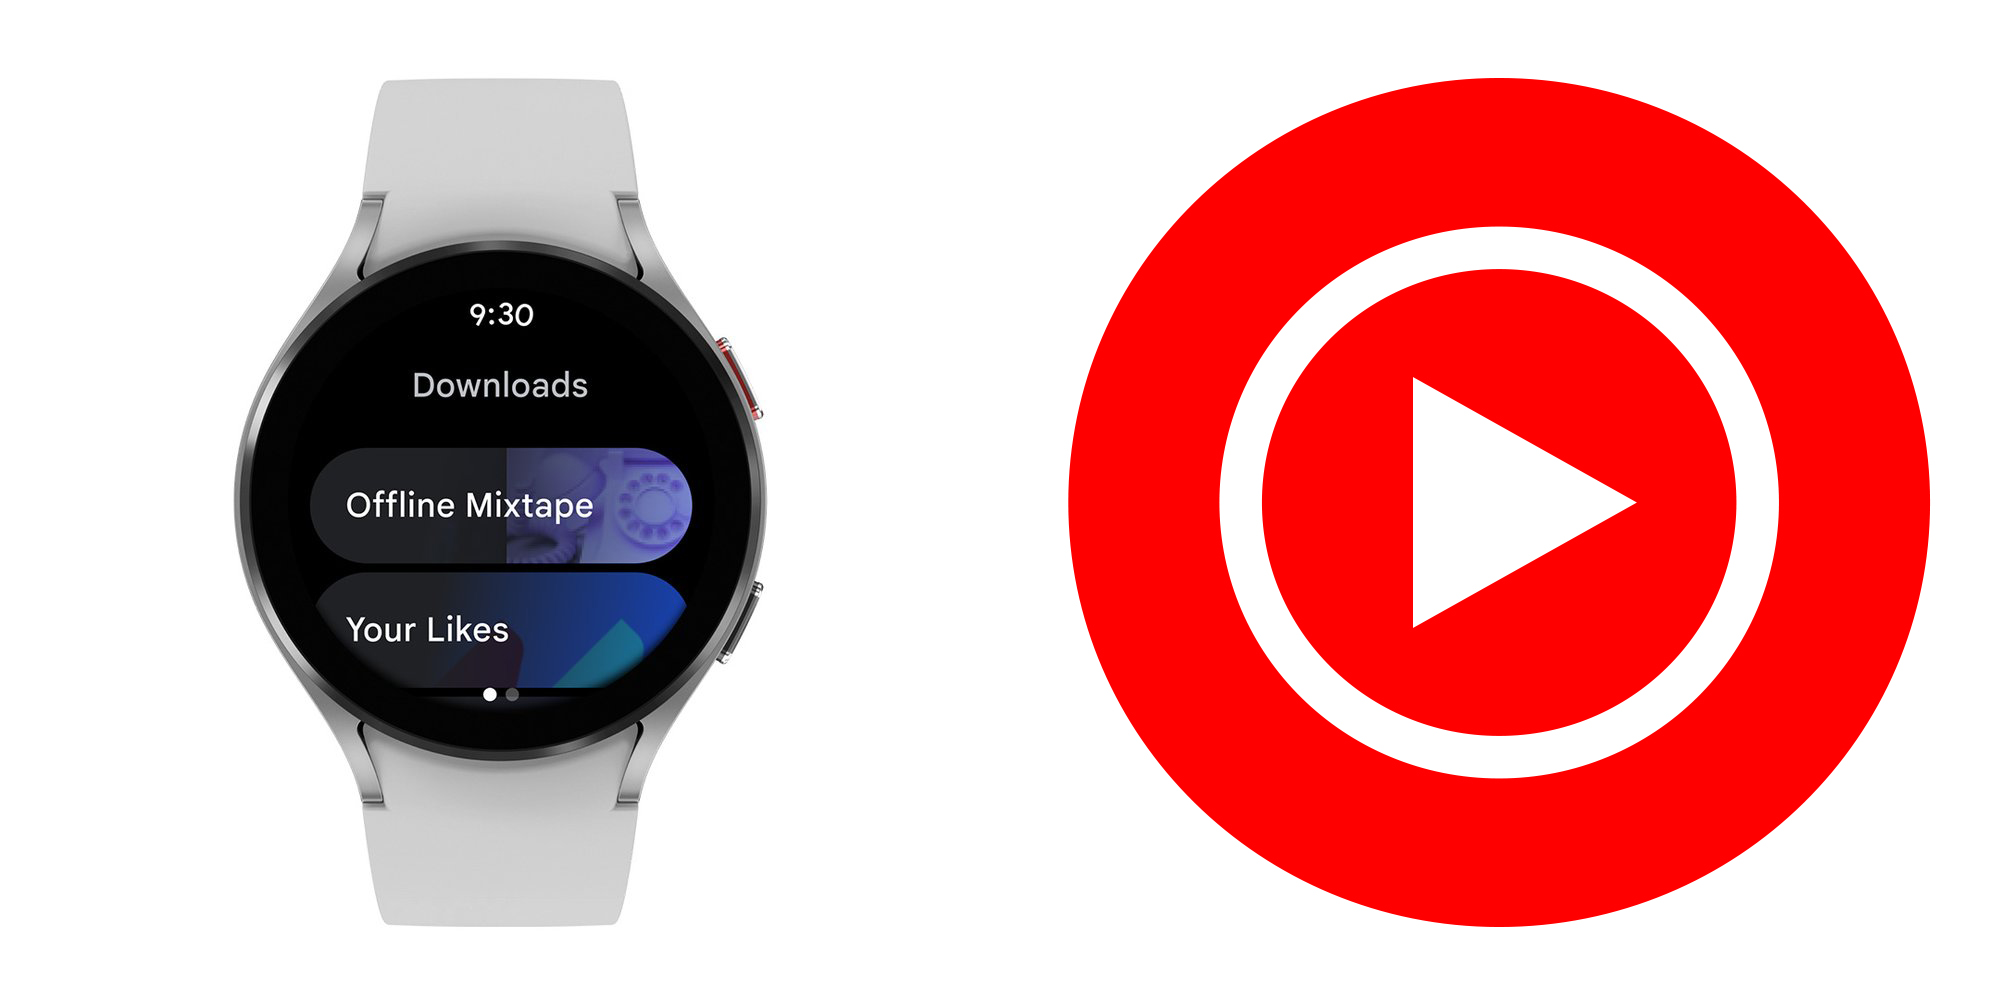 YouTube Music comes to Wear OS with Smart Downloads for offline listening